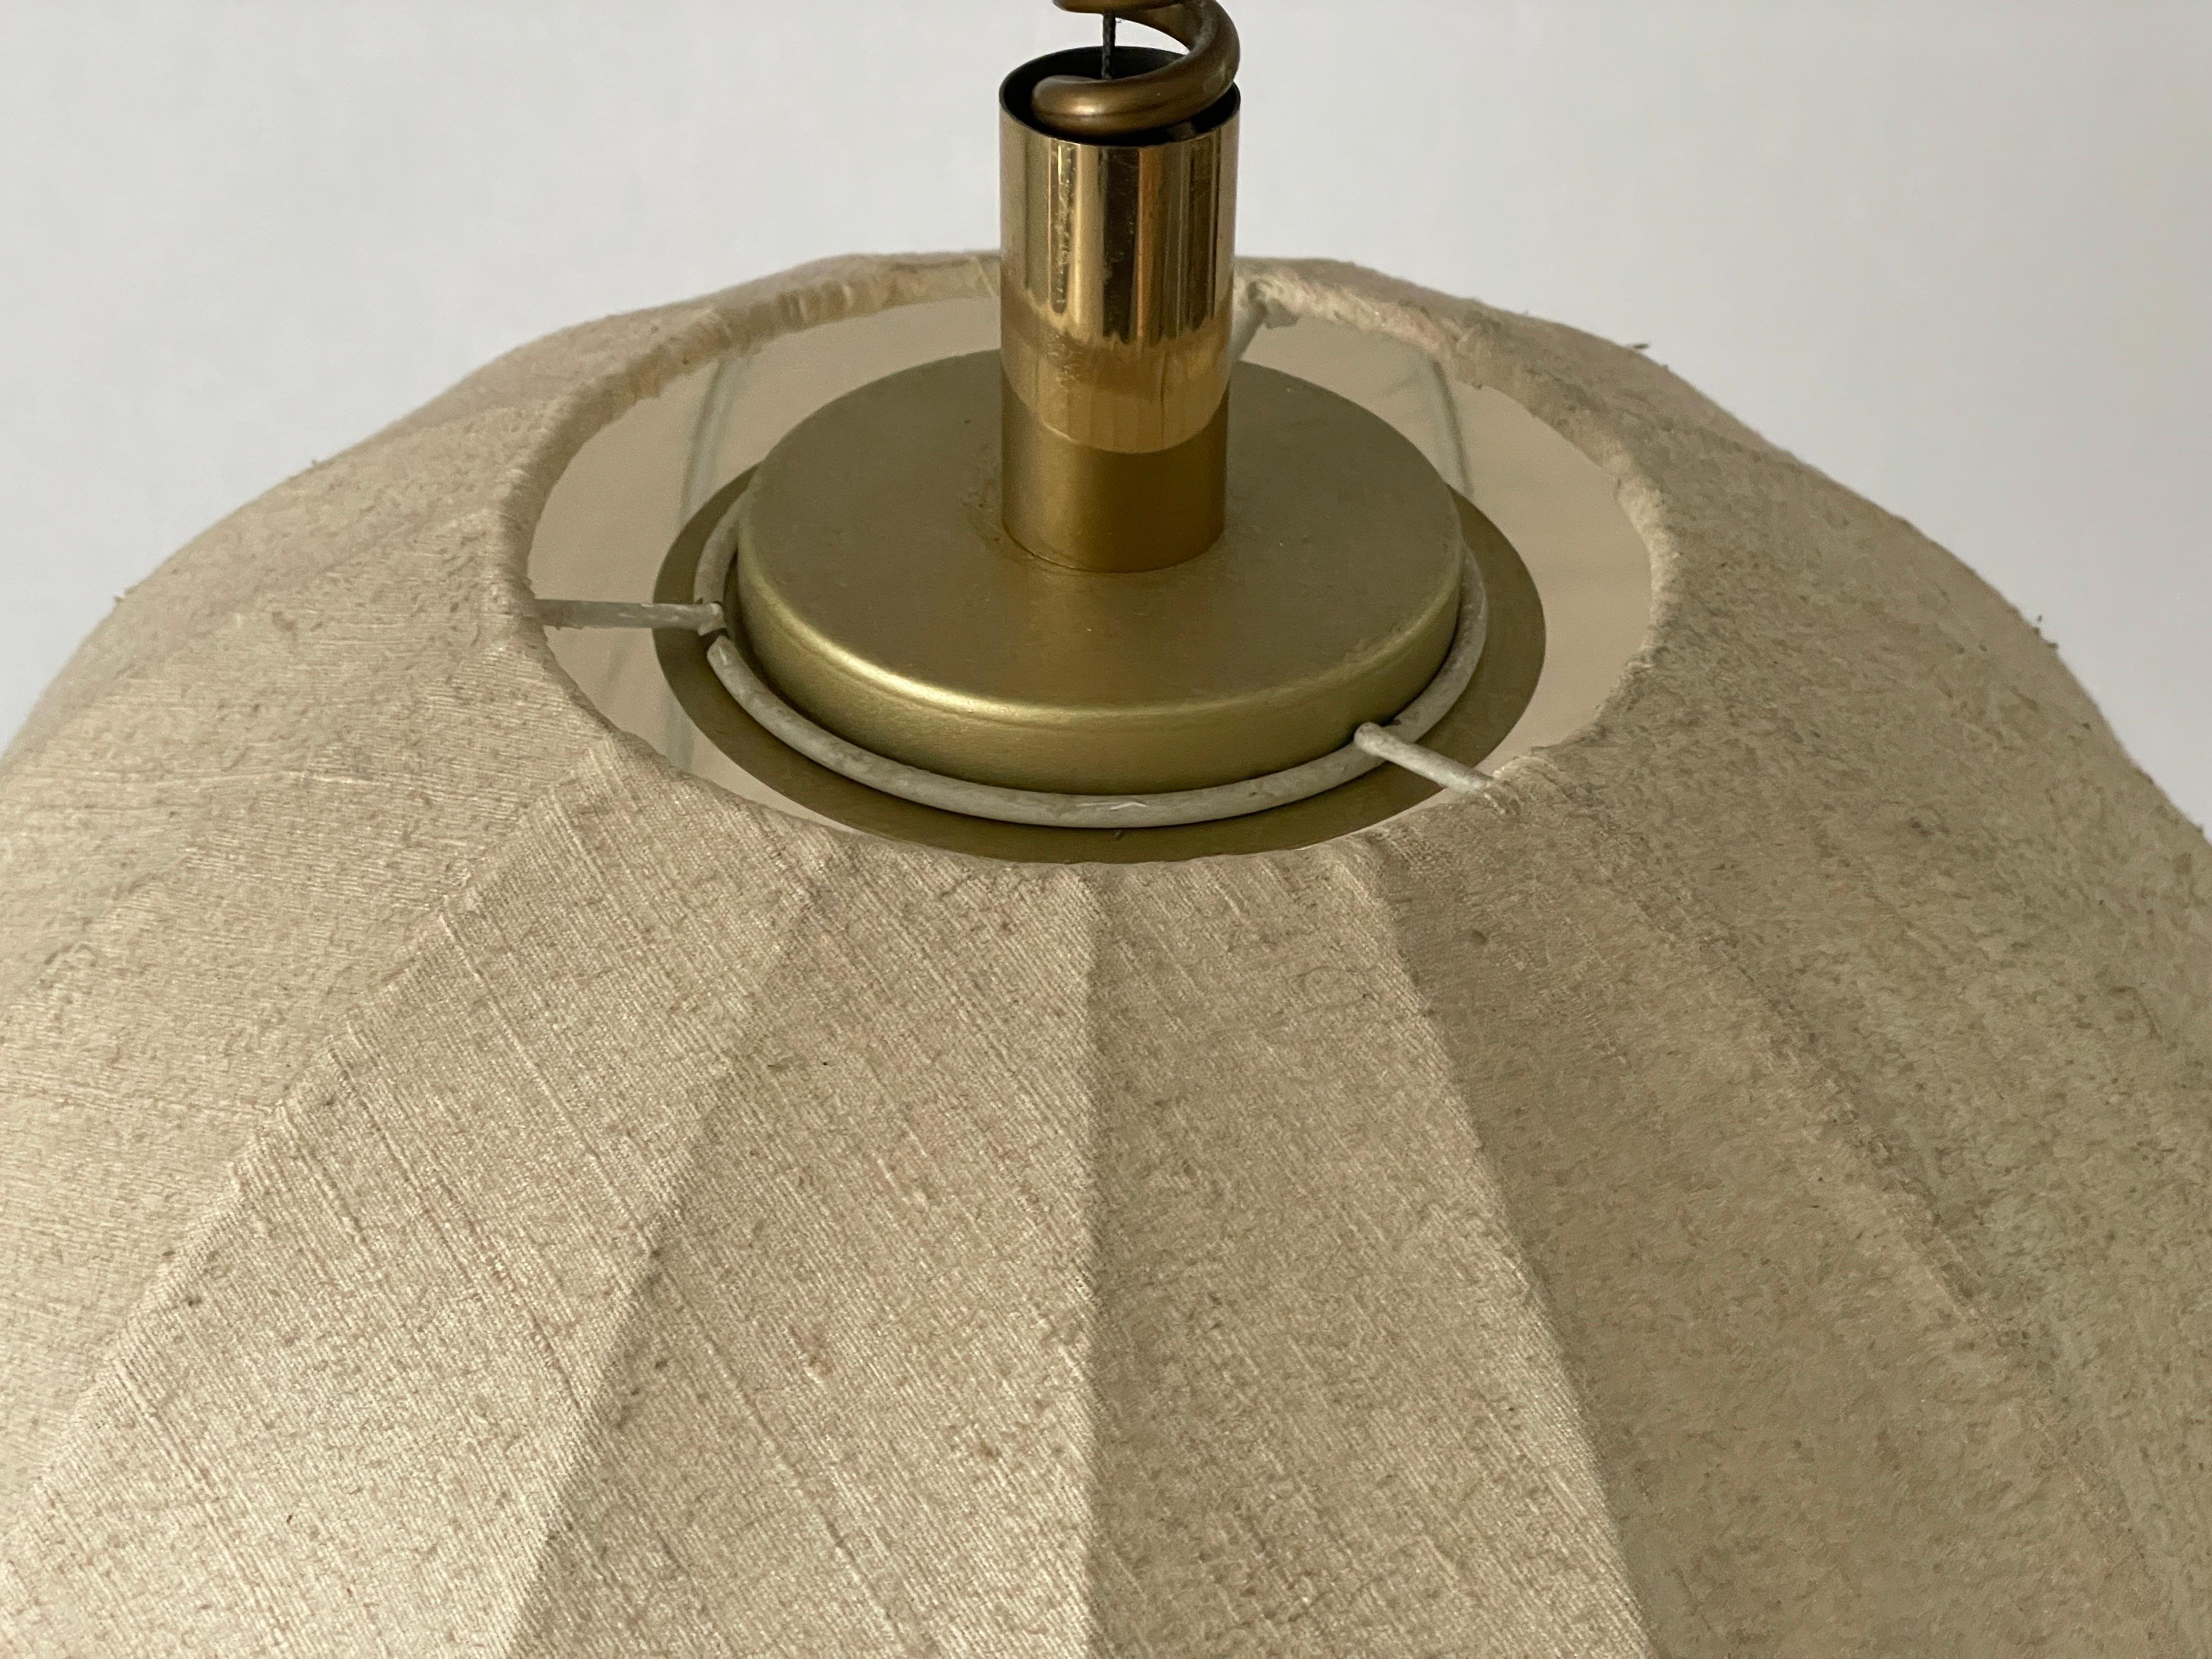 Fabric and Brass 3 socket Adjustable Shade Pendant Lamp by WKR, 1970s, Germany For Sale 2